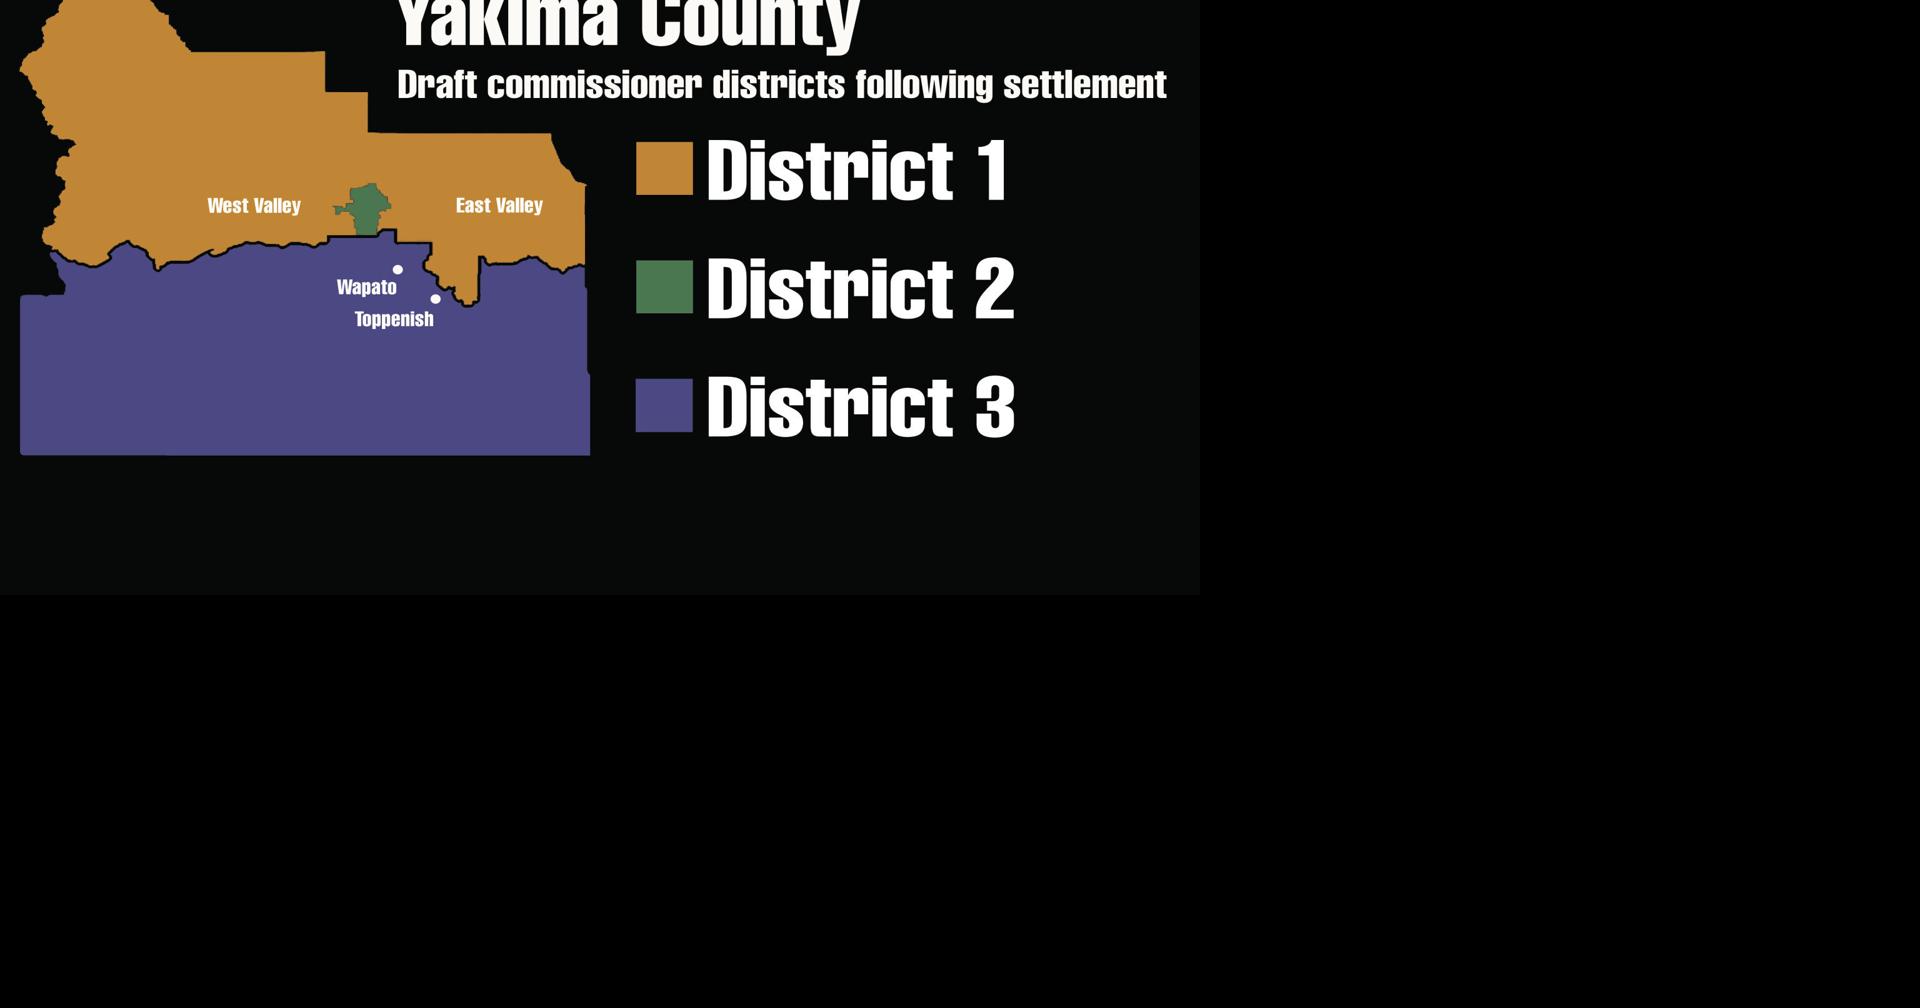 New Yakima County redistricting map released to public after court